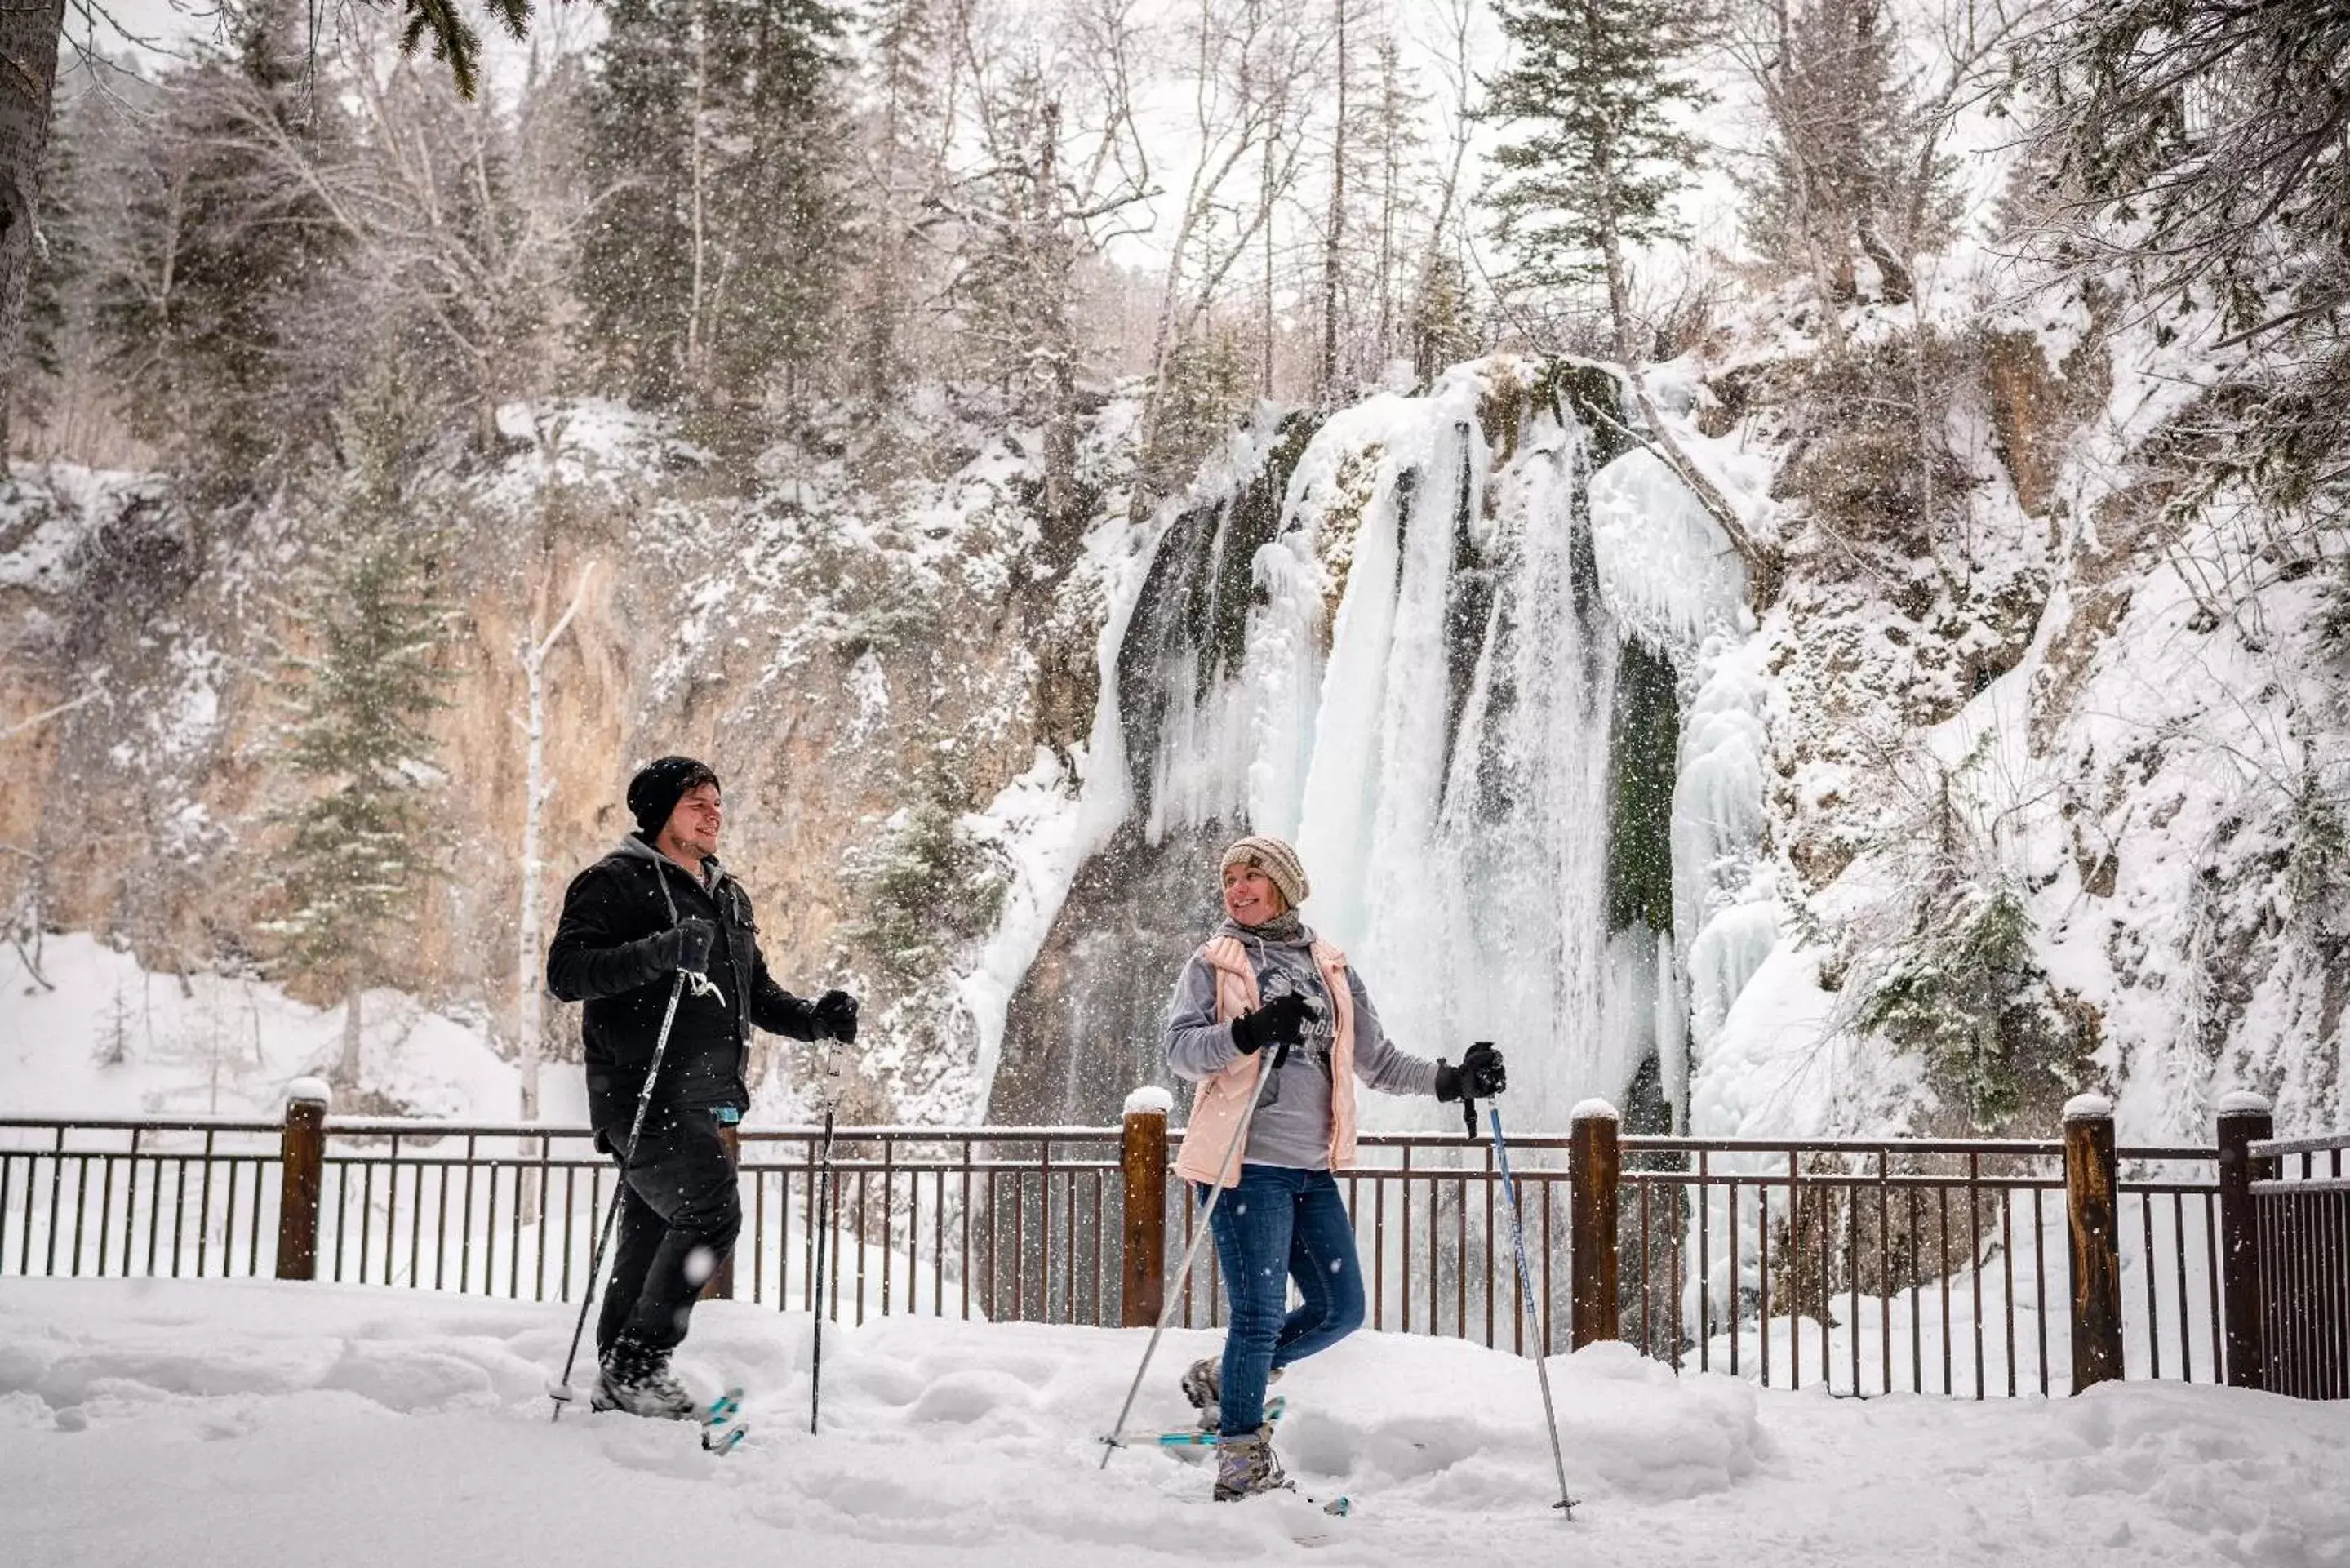 Winter in Spearfish Canyon Lodge